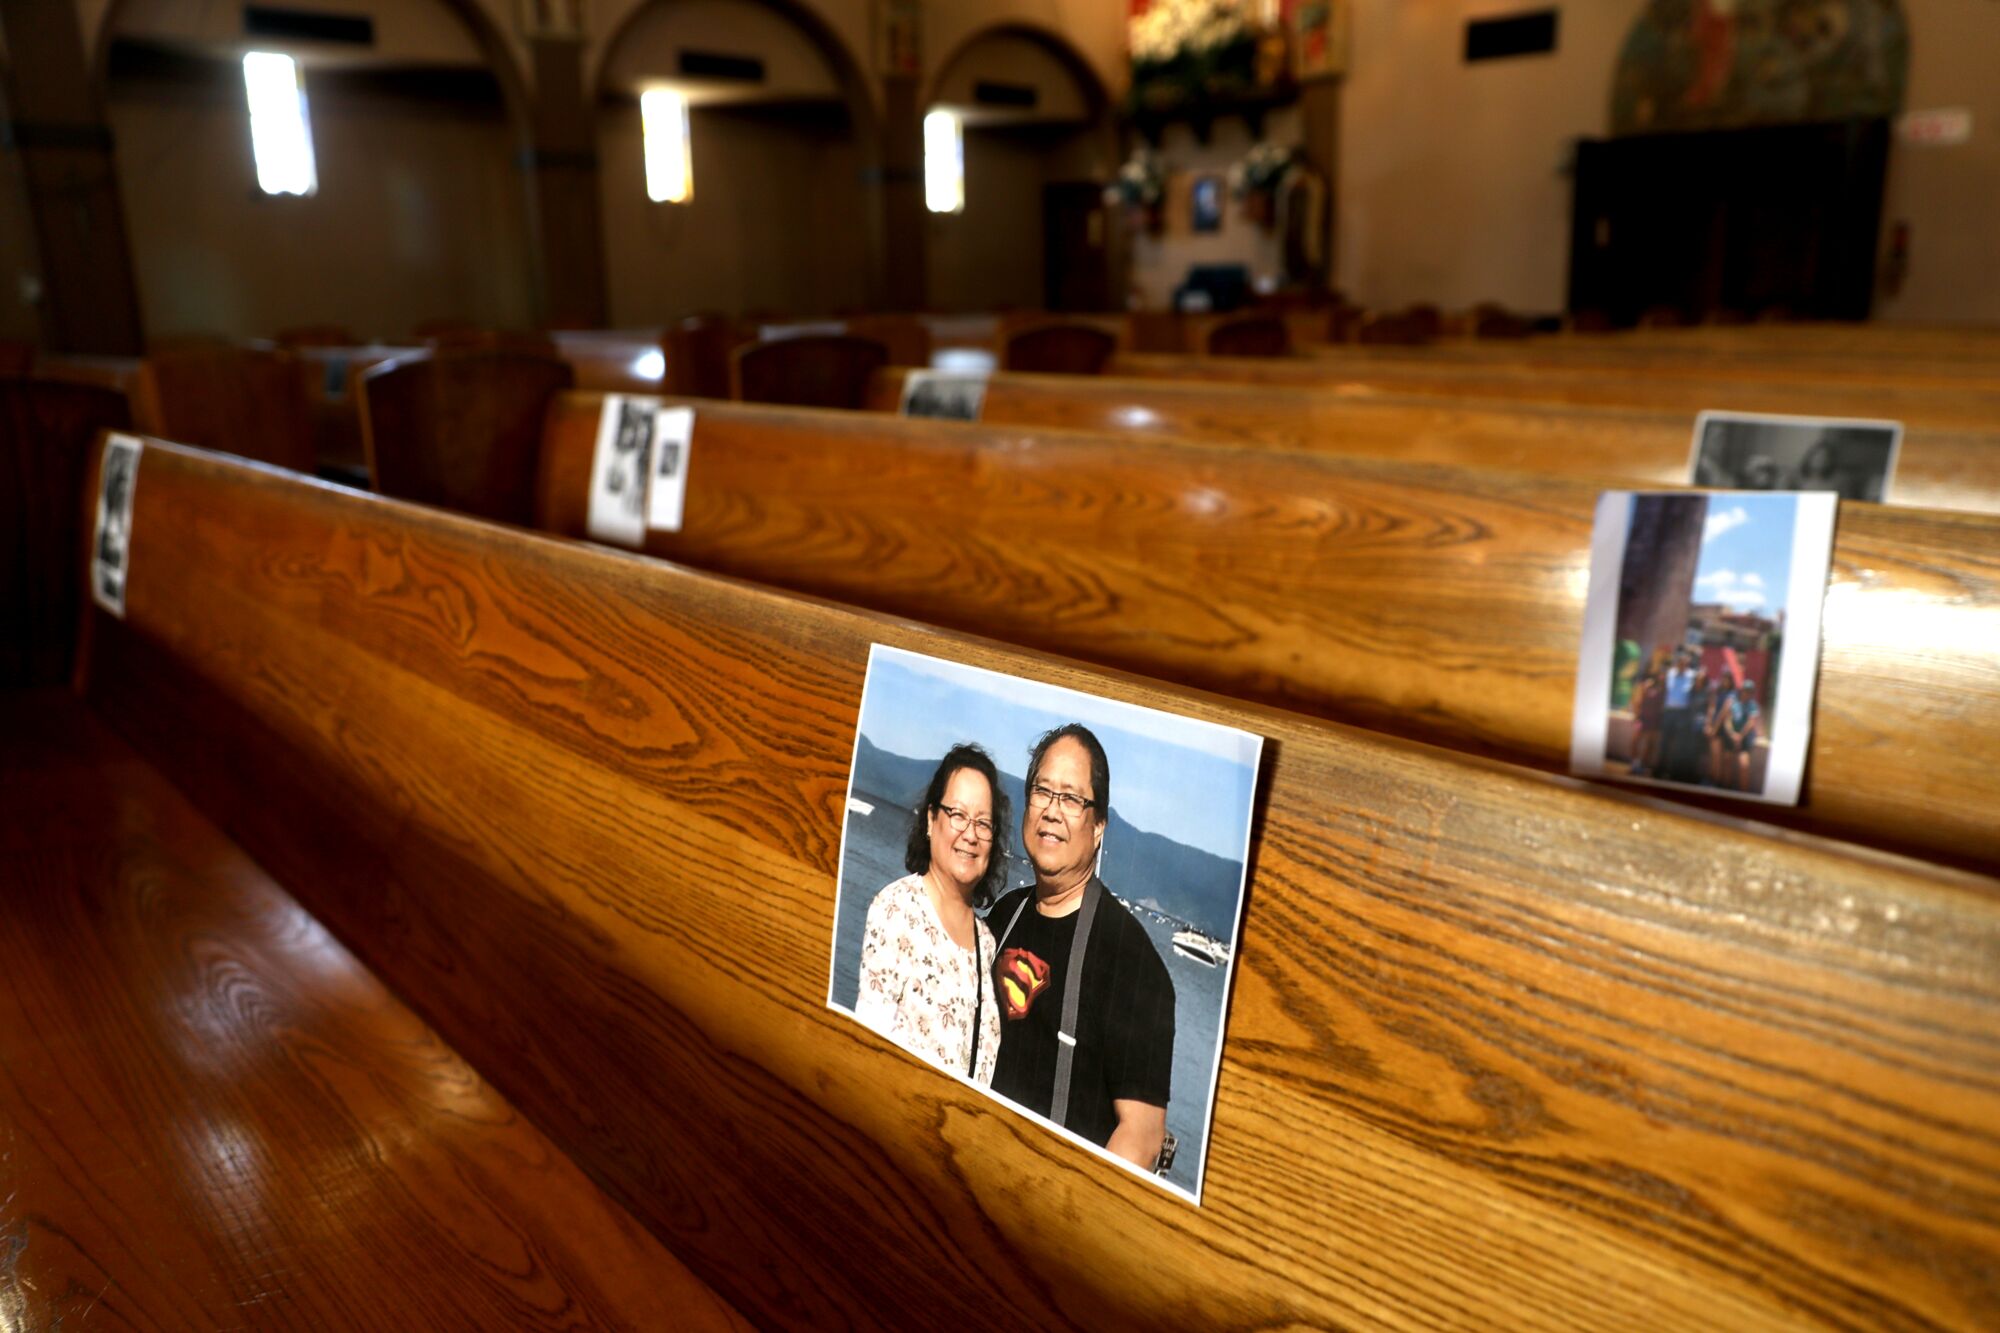 Photos of parishioners, including Henry and Gloria Lucio, are placed in the pews in preparation for Easter service at Holy Trinity Catholic Church.